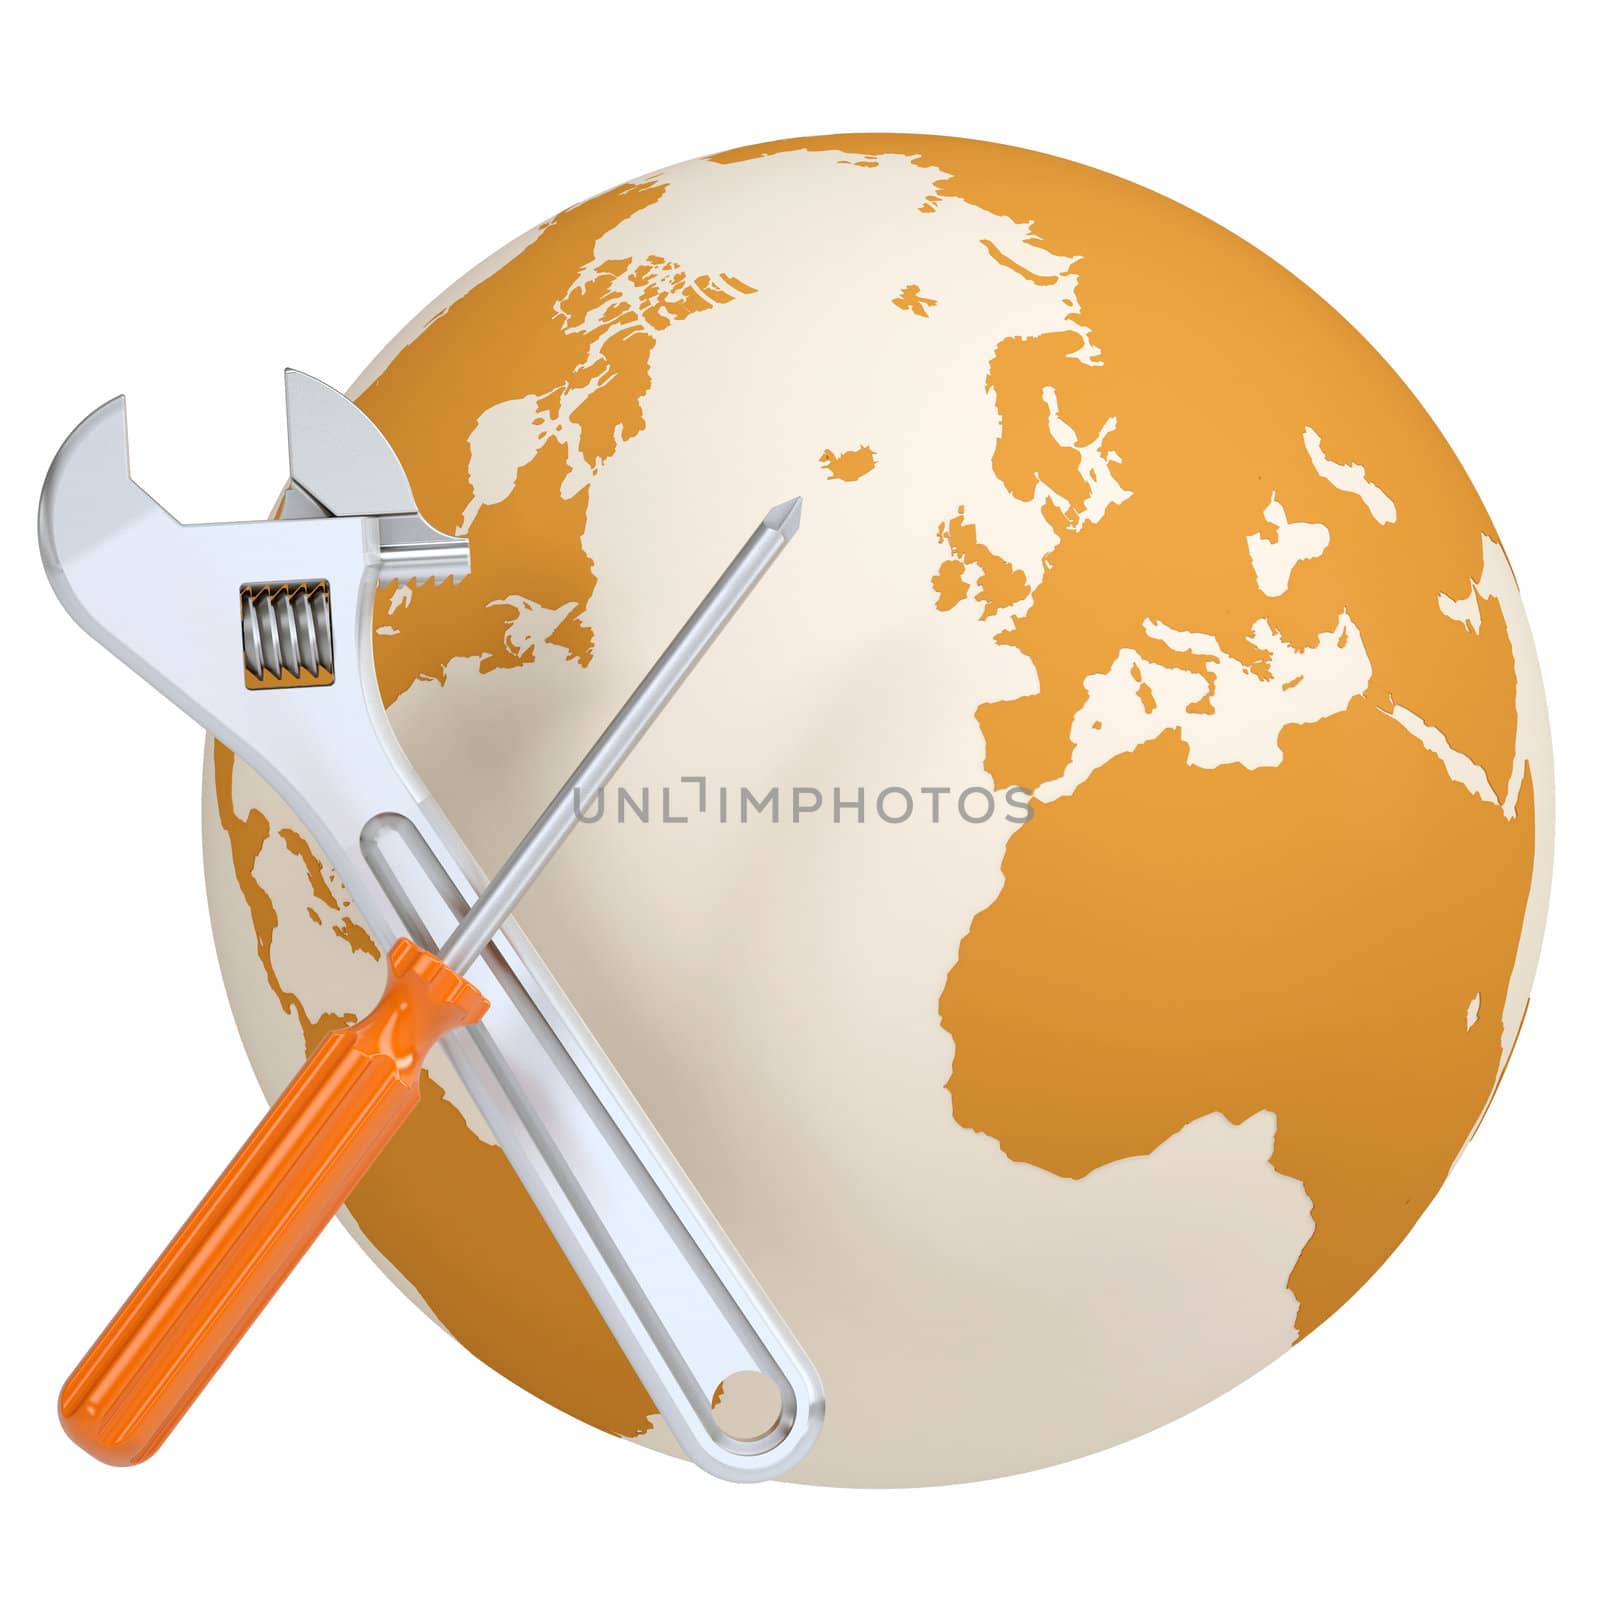 Screwdriver and wrench on the background of the planet earth. Isolated render on a white background